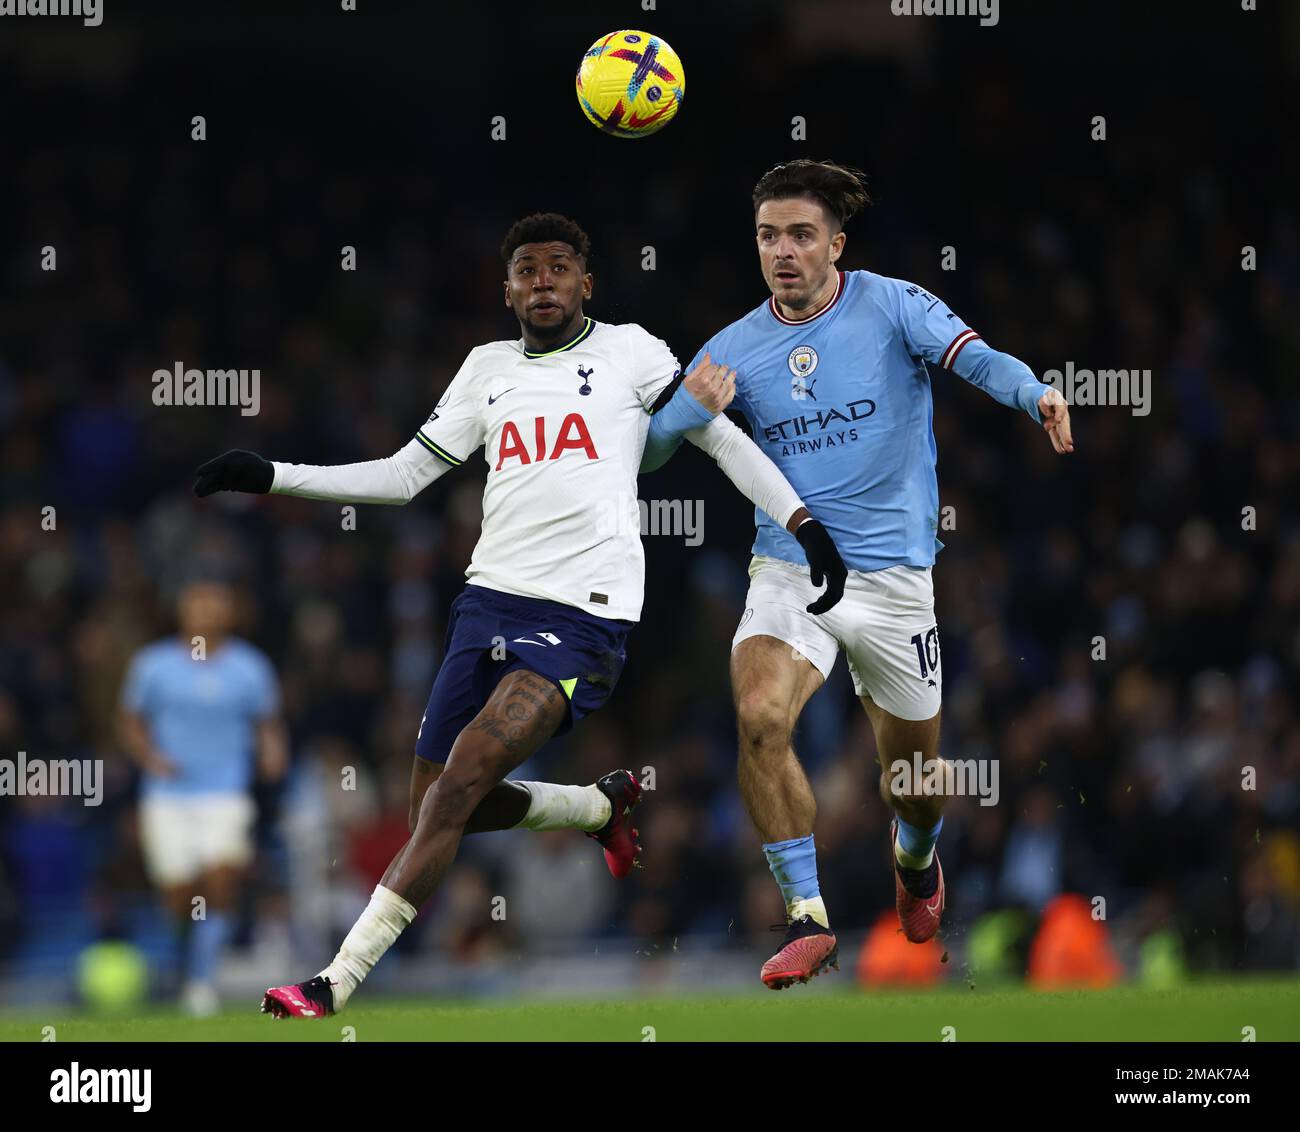 Manchester, UK. 19th January 2023. Emerson of Tottenham tussles with Jack Grealish of Manchester City during the Premier League match at the Etihad Stadium, Manchester. Credit: Sportimage/Alamy Live News Stock Photo